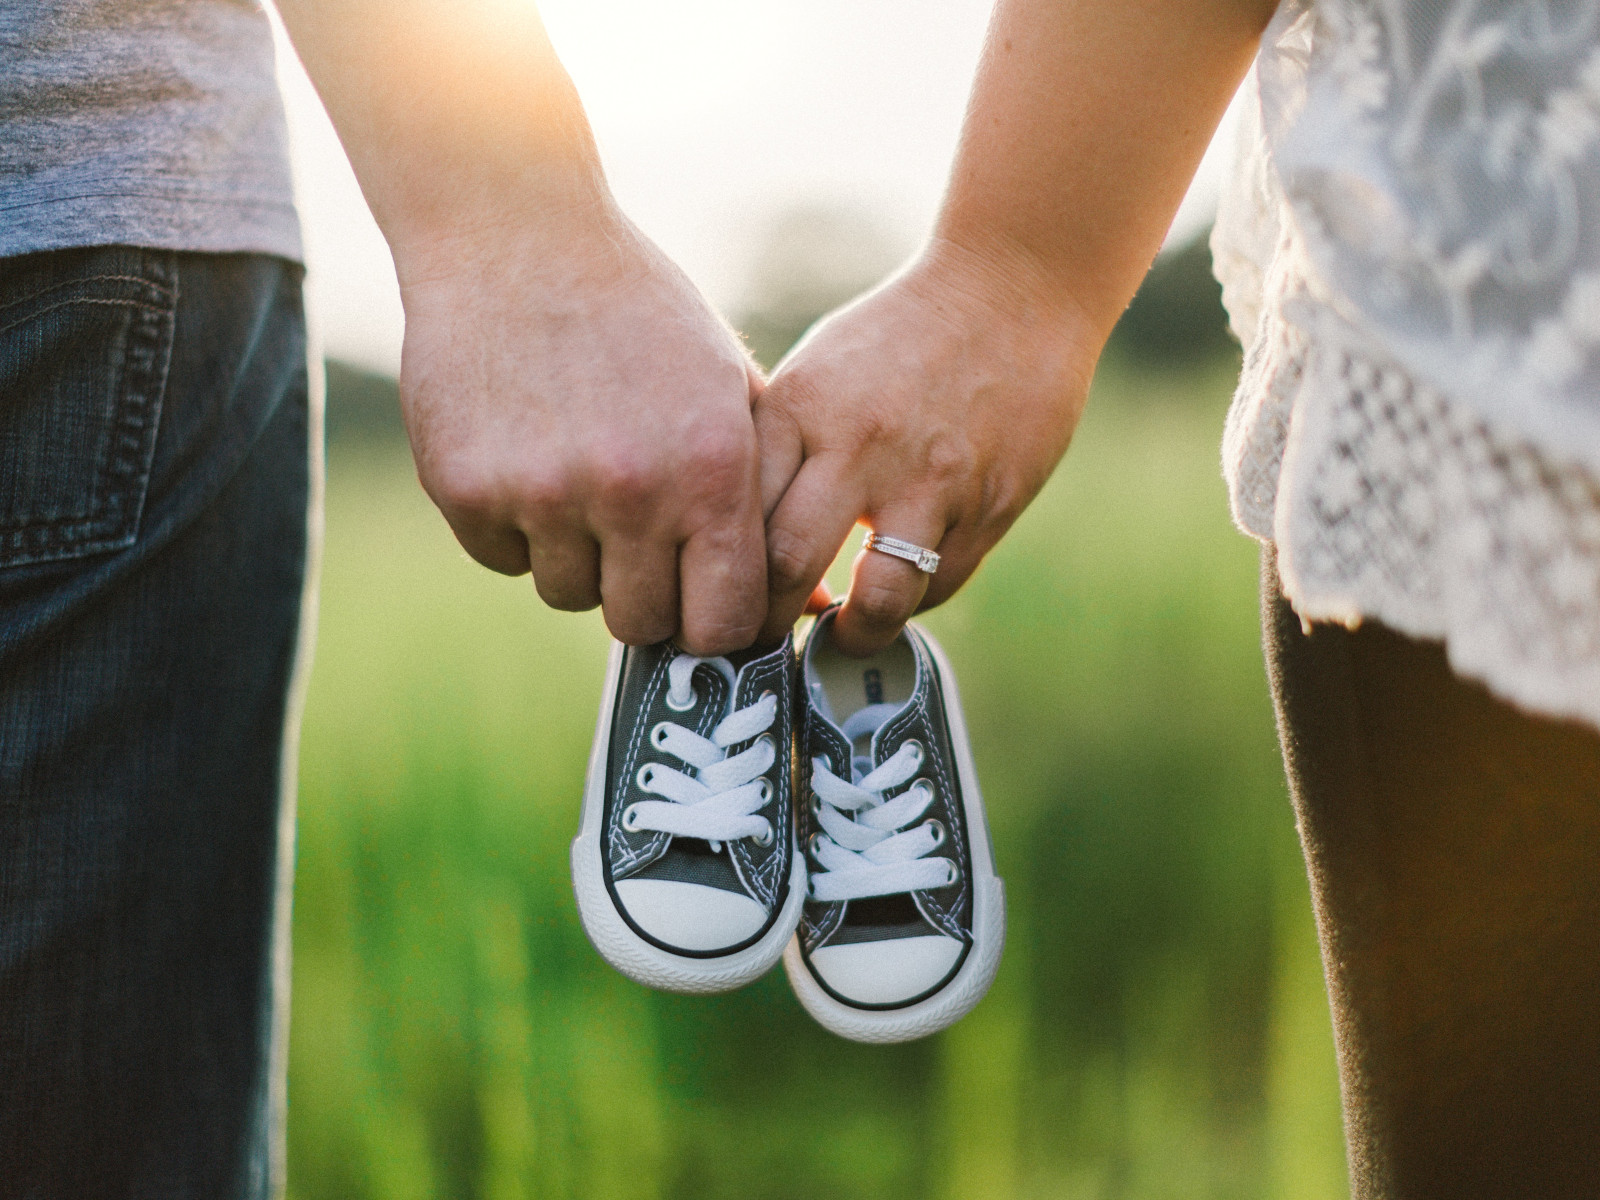 Parents holding hands and baby Converse shoes